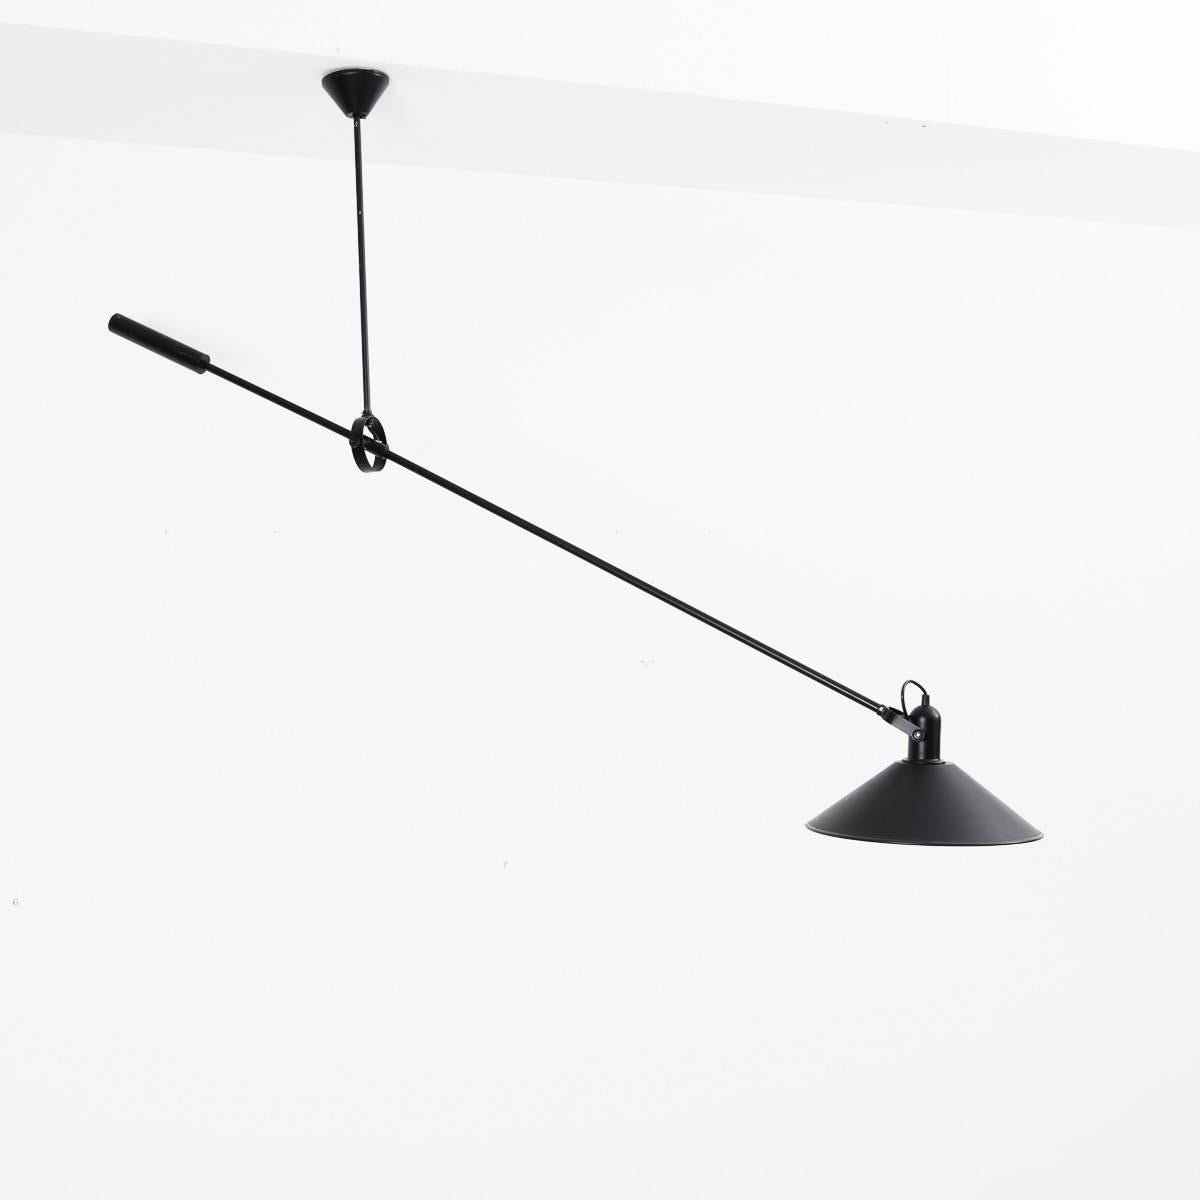 A sculptural counterbalanced ceiling lamp by one of the most respected Dutch lighting designers of the era, JJM Hoogervorst, principle designer for ANVIA, Holland. The weighted arm holds the position of the lamp. It is in excellent condition with